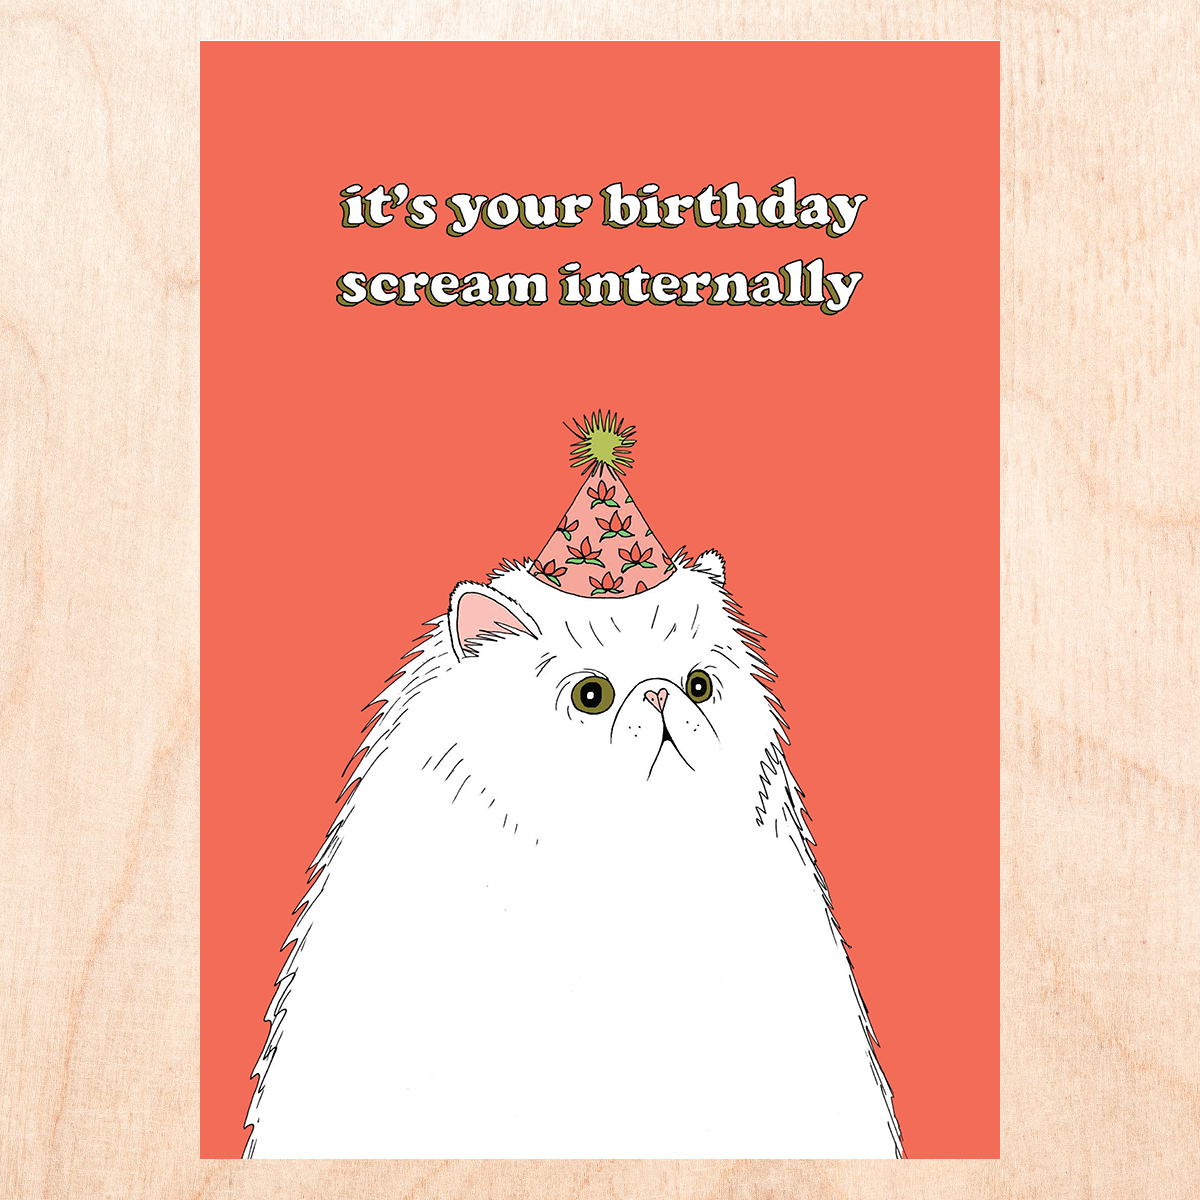 Our SCREAM birthday card features a fluffy white cat in the midst of an existential crisis. You can see it in his eyes